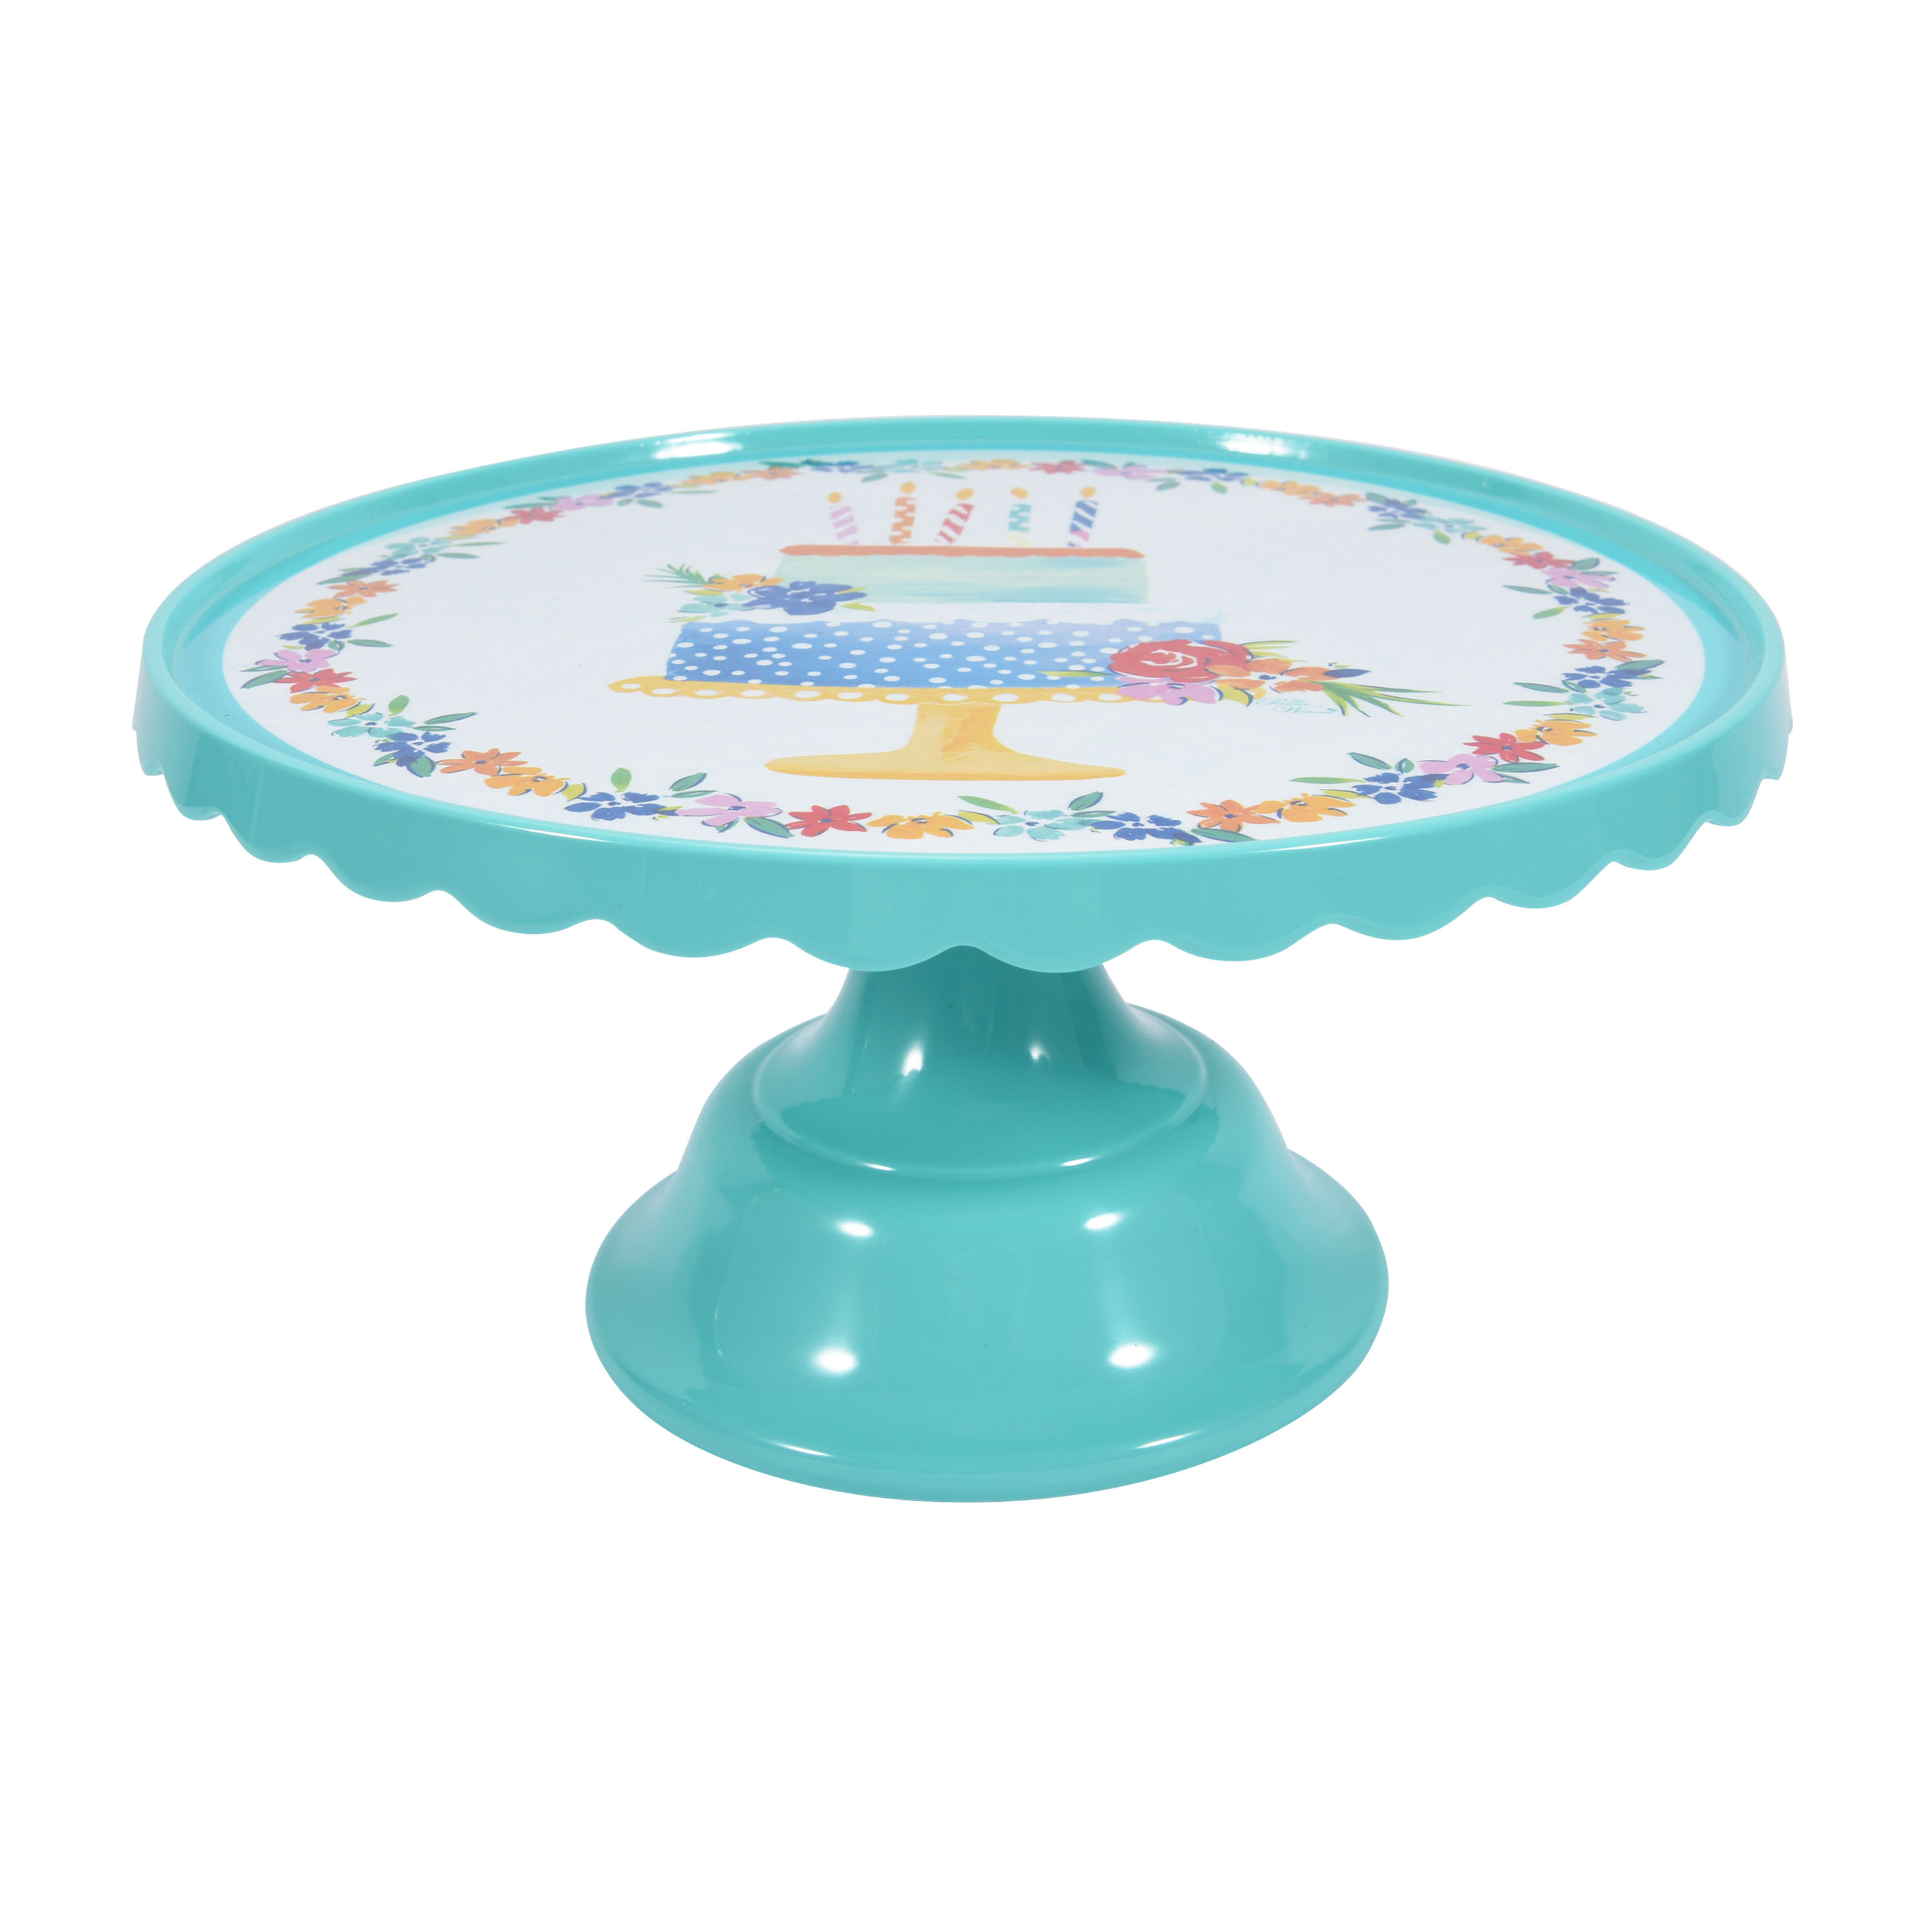 The Pioneer Woman 11-inch Cake Stand Assortment - image 3 of 4